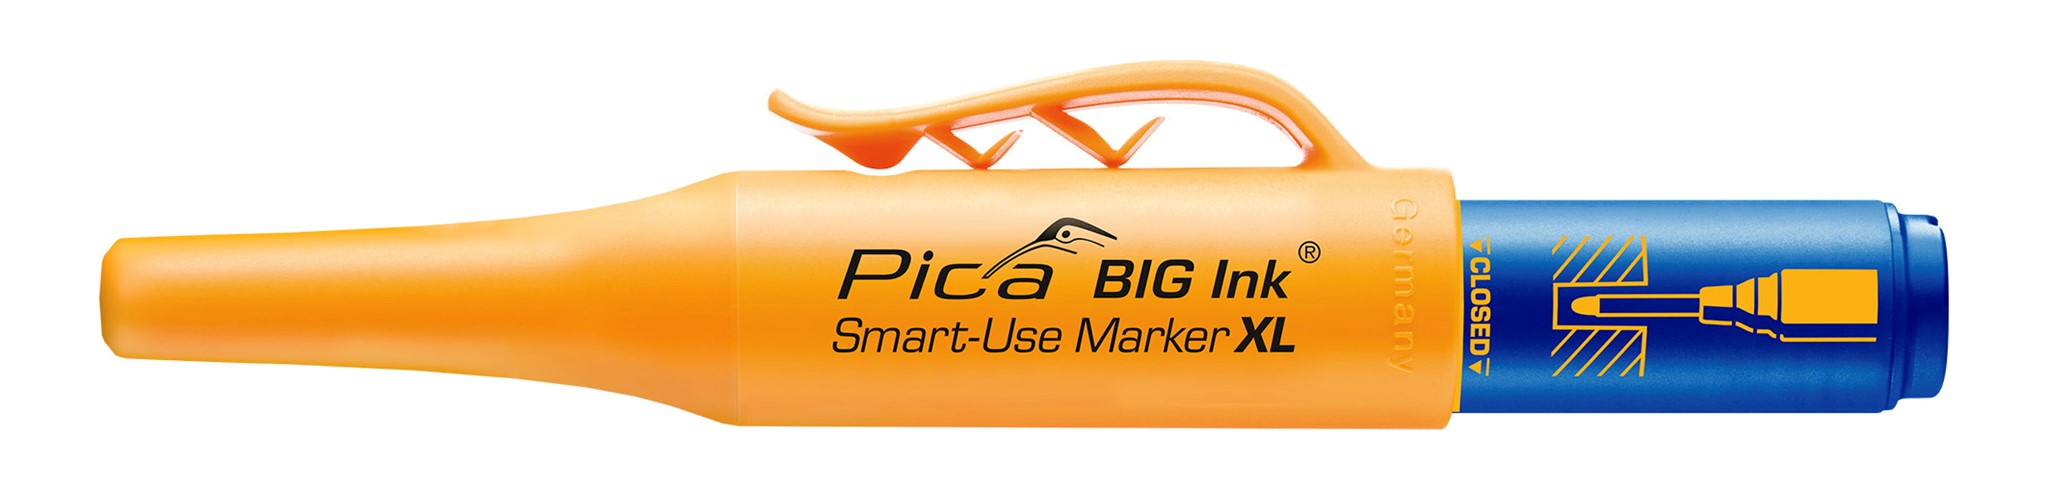 Picture of Pica BIG INK Smart-Use Marker XL / blau